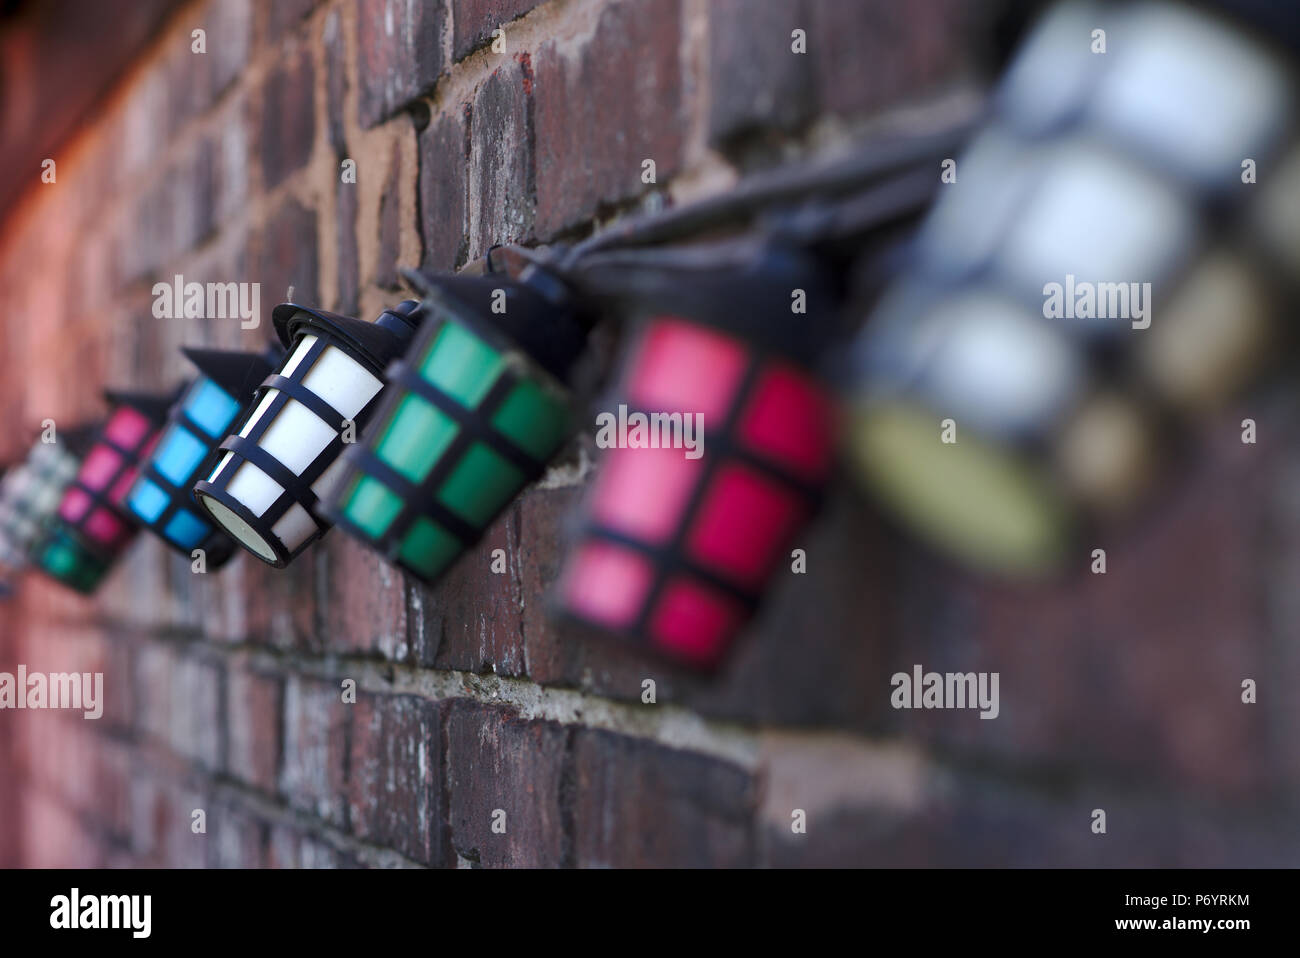 String of coloured lights against a brick wall Stock Photo